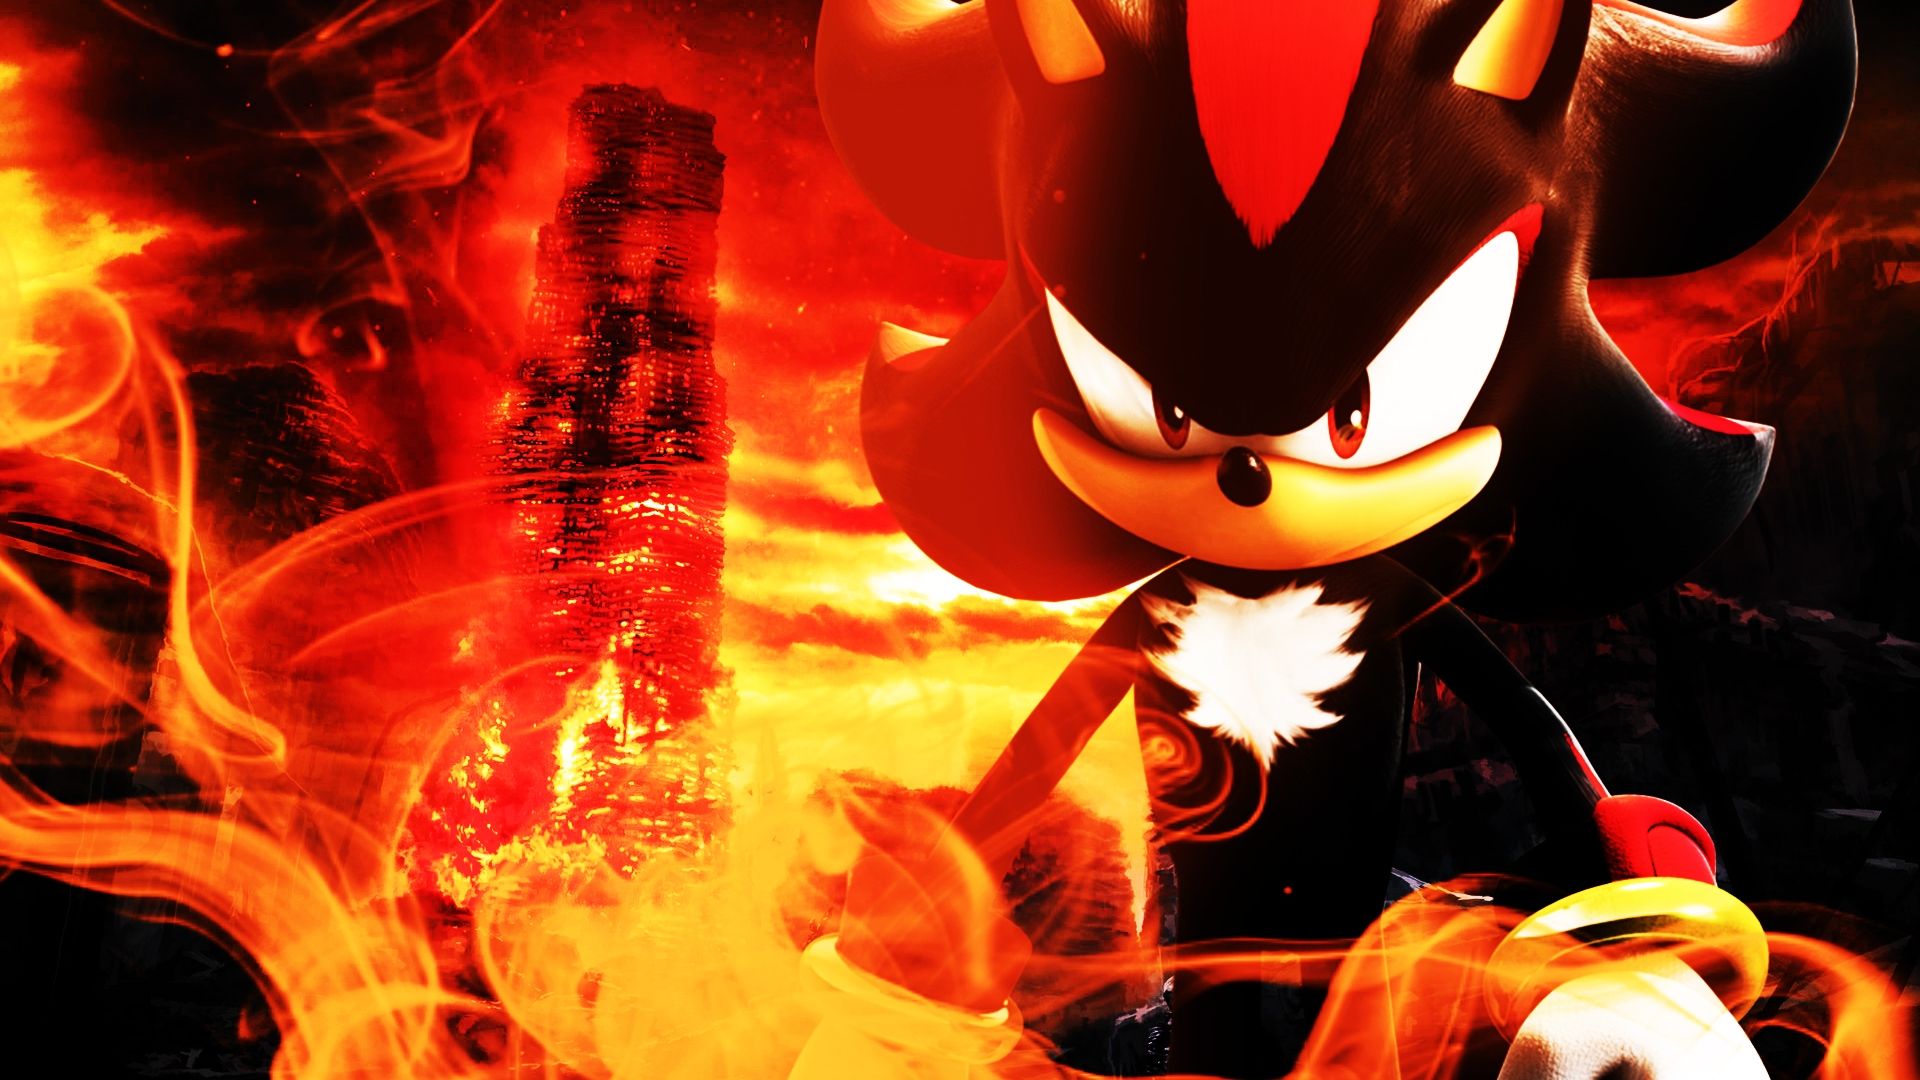 Free download Shadow The Hedgehog Wallpaper HD Shadow the hedgehog [1920x1200] for your Desktop, Mobile & Tablet. Explore Sonic and Shadow Wallpaper. Super Sonic Wallpaper, Sonic Adventure 2 Wallpaper